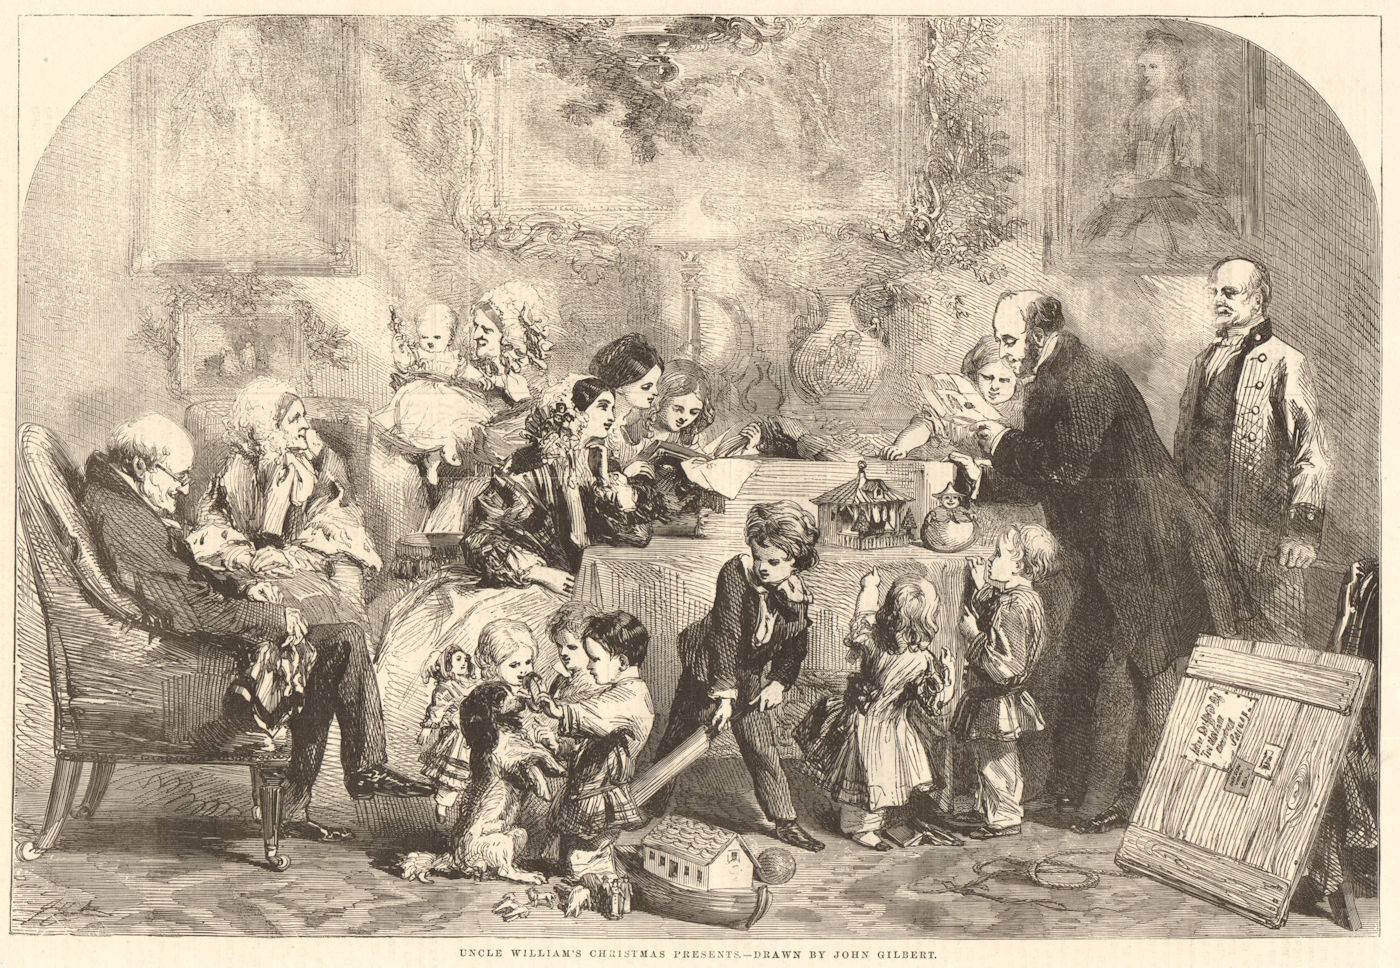 Associate Product Uncle William's Christmas presents - drawn by John Gilbert. Family 1856 print